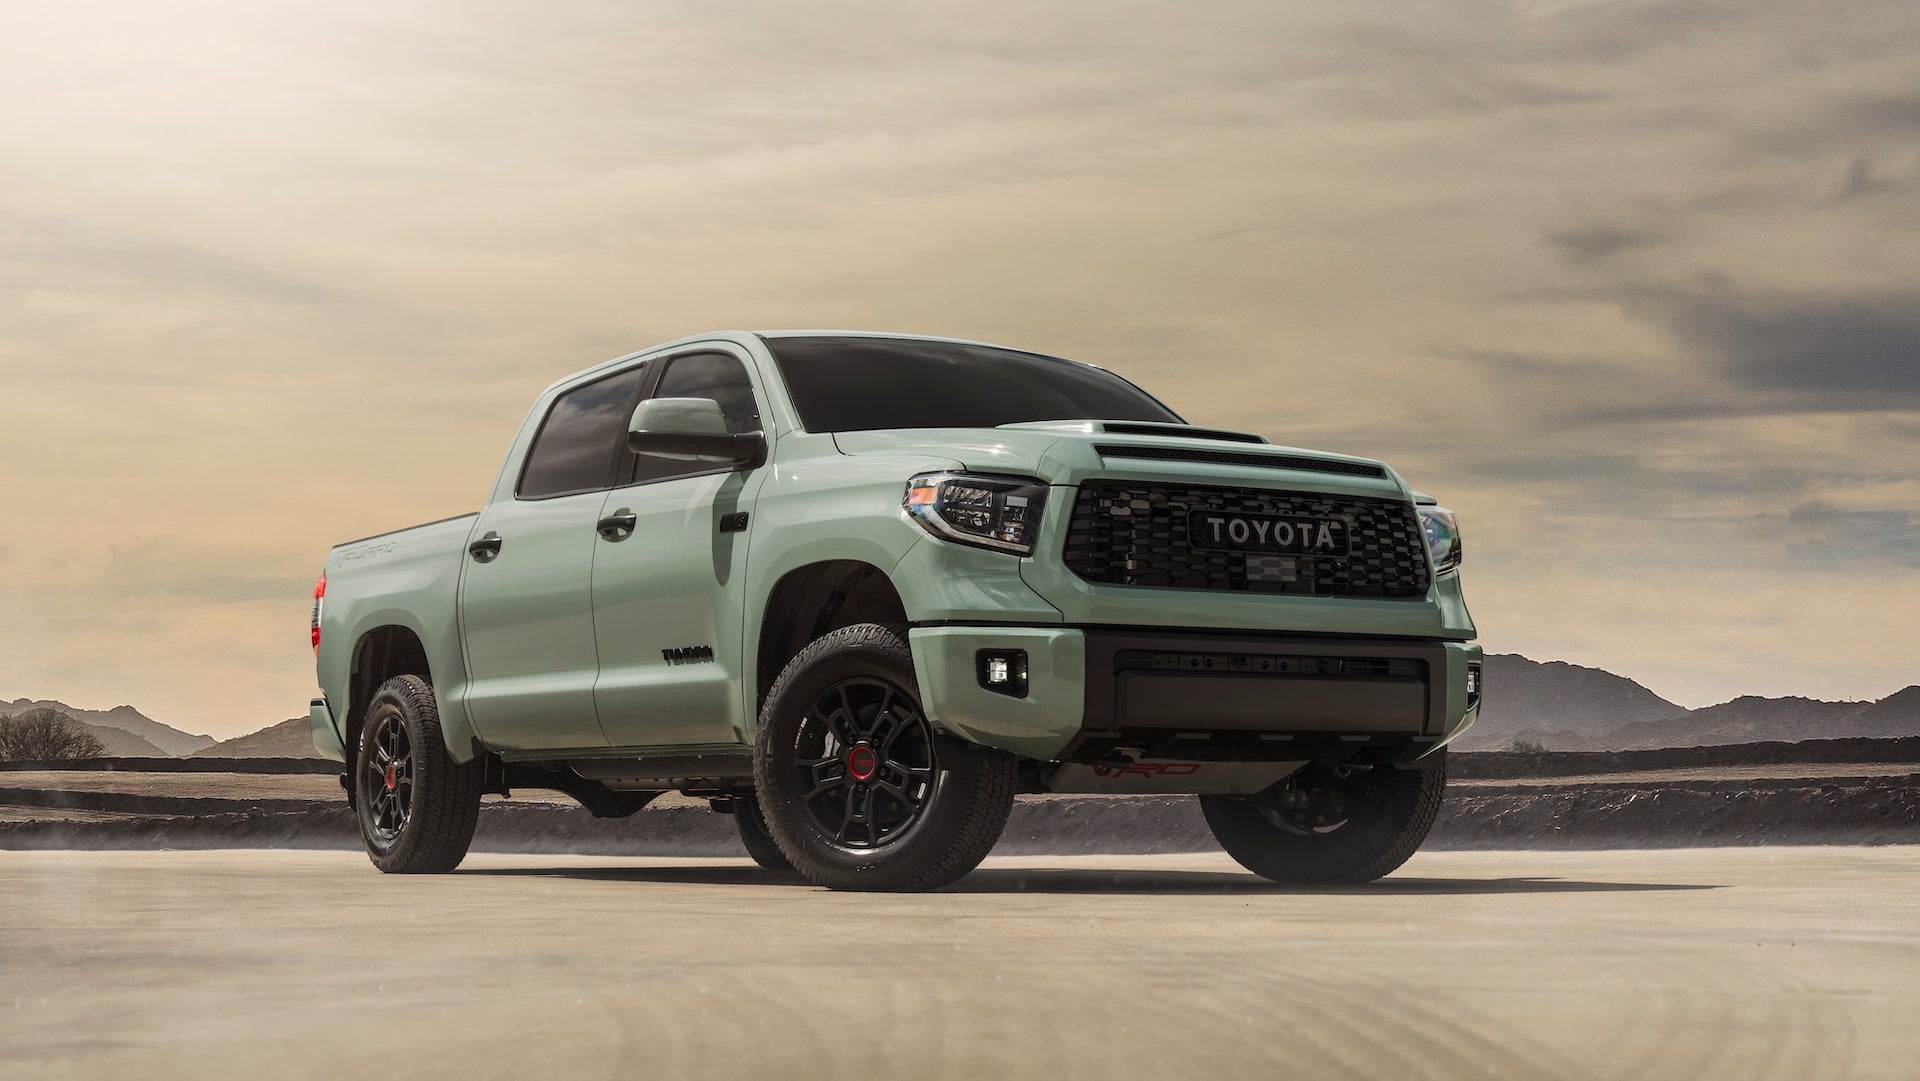 2021 Toyota 4Runner SUV and Tundra Pickup Get Small Updates and Modest Price Bump